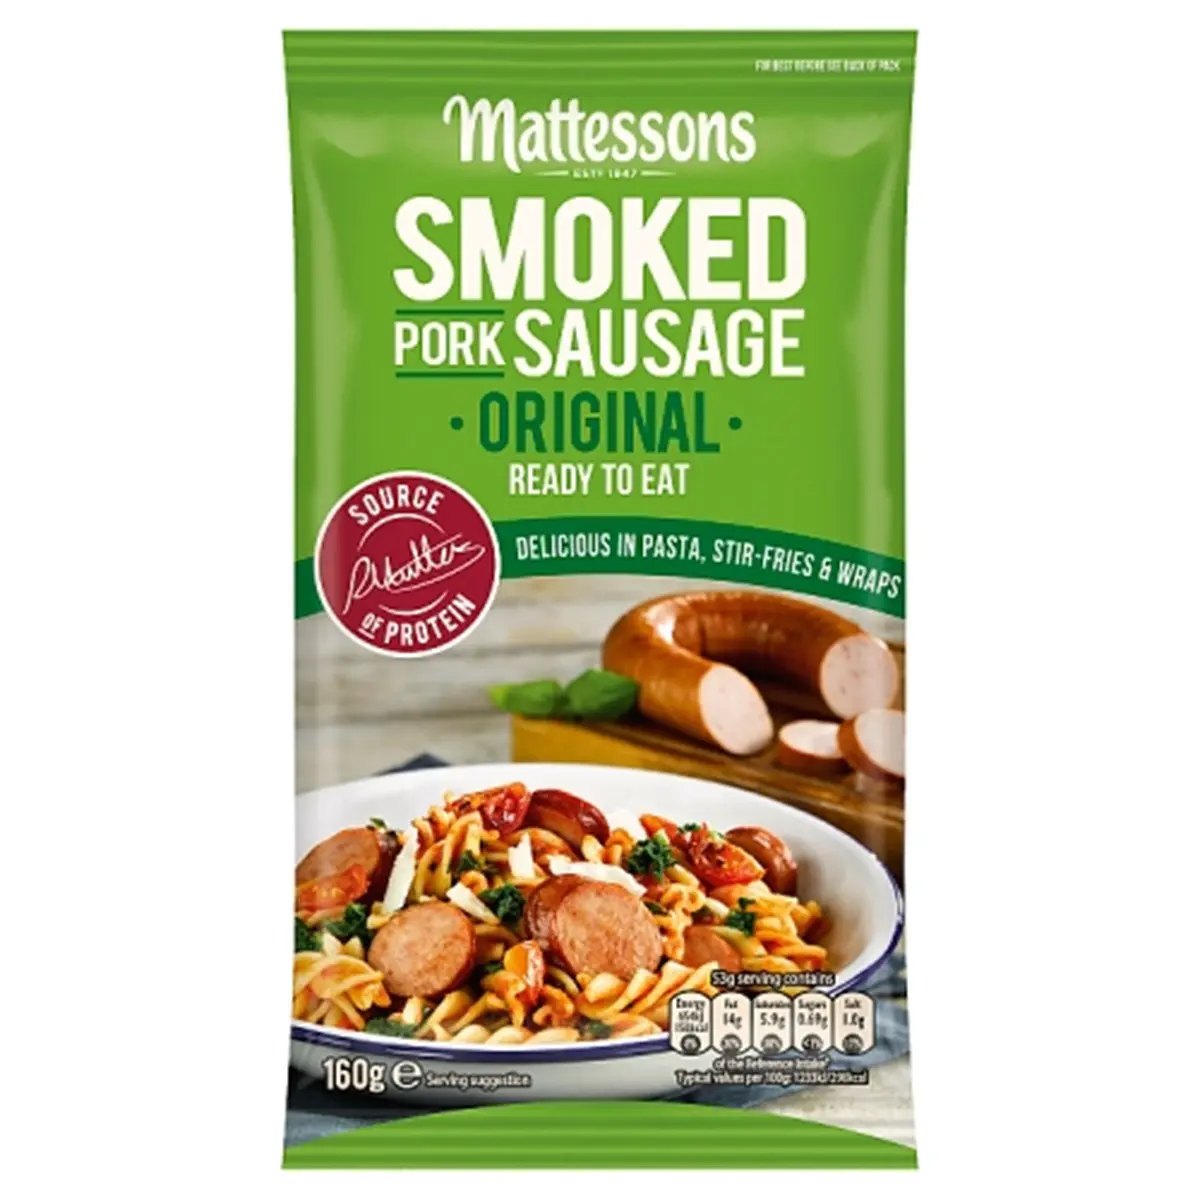 mattessons smoked sausage - Is smoked sausage fully cooked